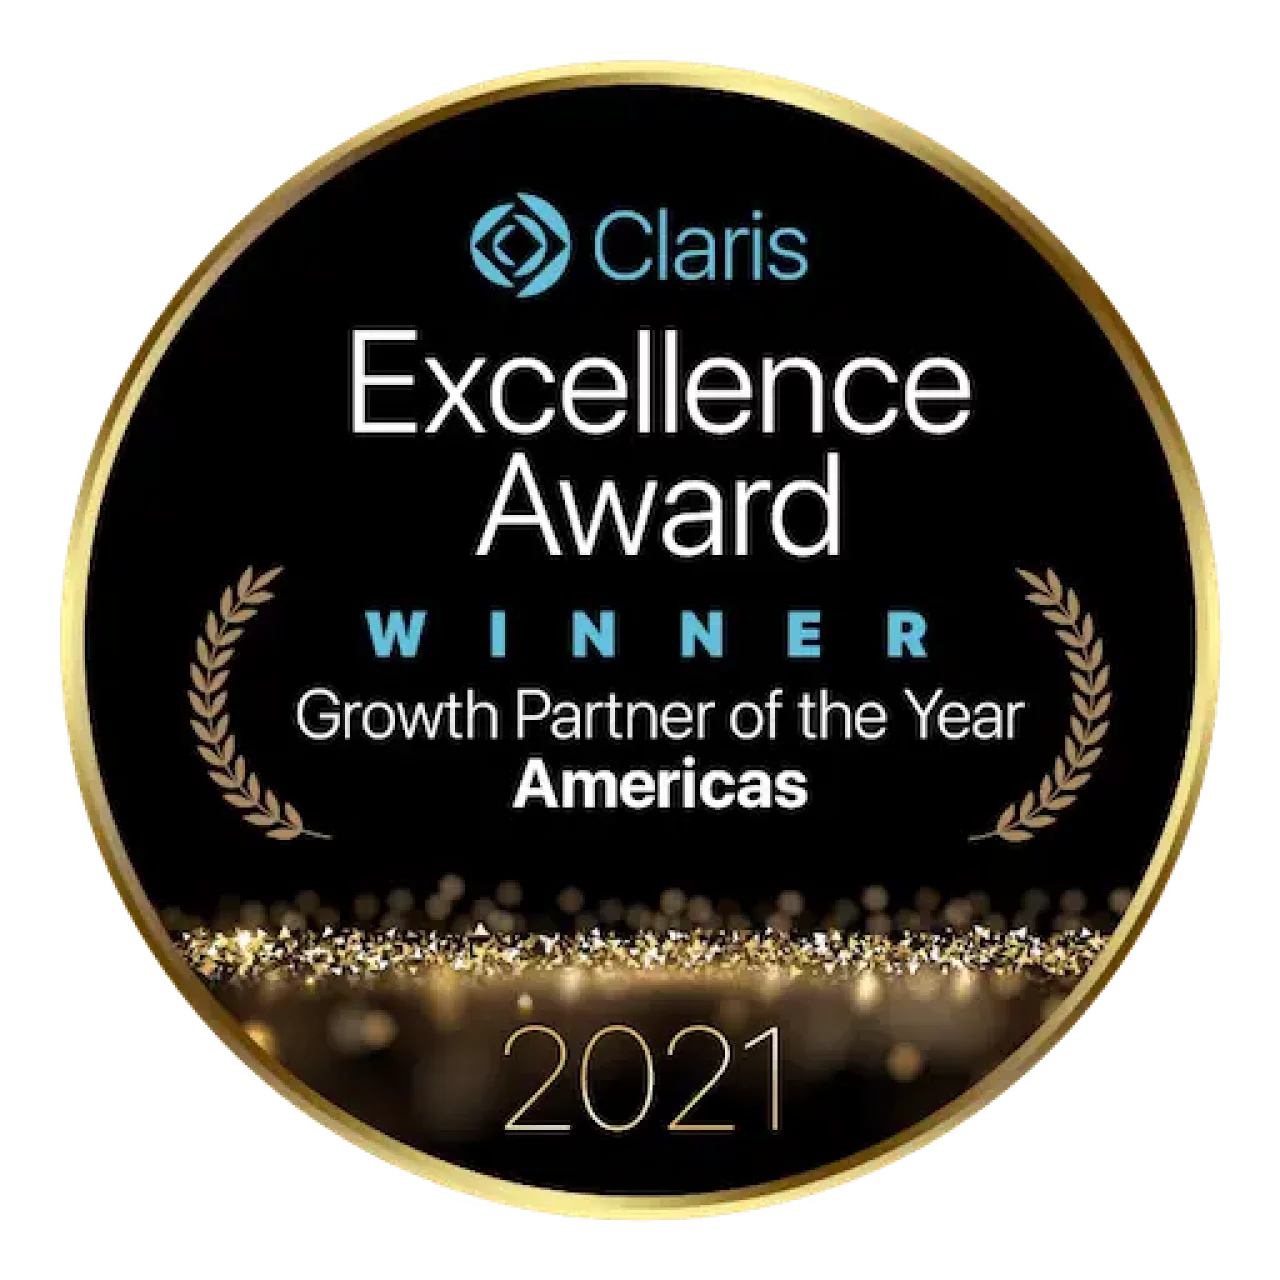 Claris excellence award winner growth partner of the year americas filemaker 2021.